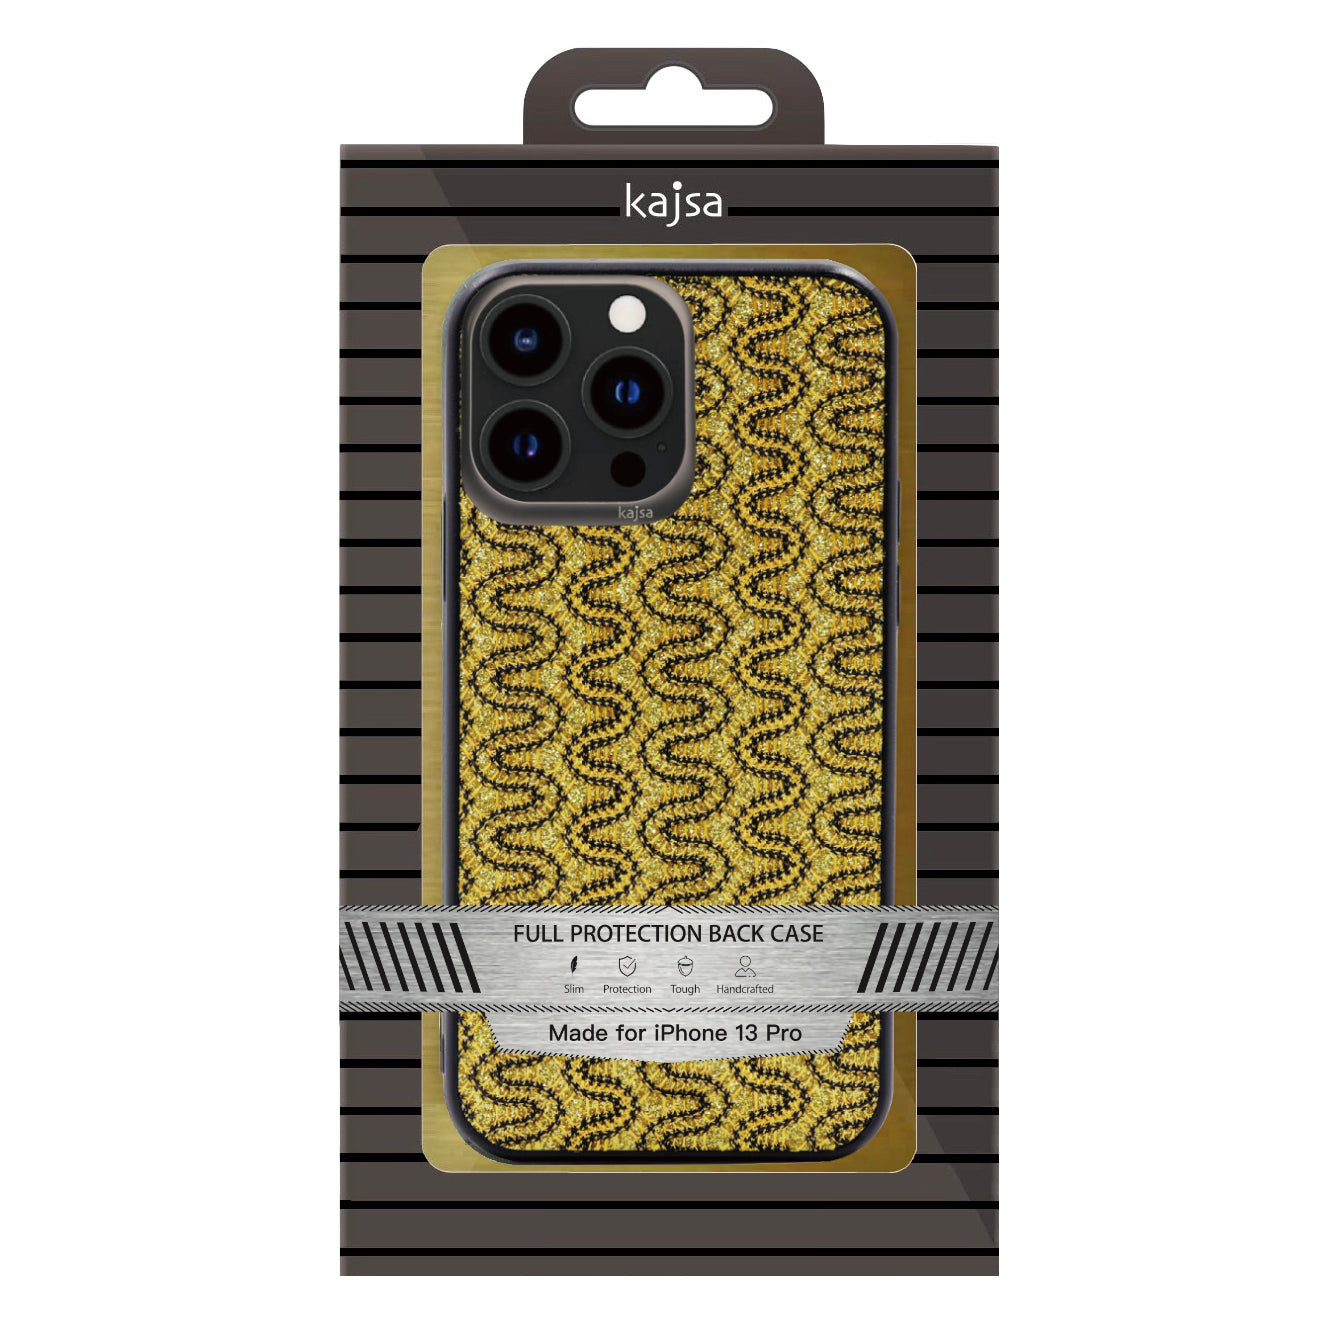 Glamorous Collection - Waterfall Pattern Back Case for iPhone 13-Phone Case- phone case - phone cases- phone cover- iphone cover- iphone case- iphone cases- leather case- leather cases- DIYCASE - custom case - leather cover - hand strap case - croco pattern case - snake pattern case - carbon fiber phone case - phone case brand - unique phone case - high quality - phone case brand - protective case - buy phone case hong kong - online buy phone case - iphone‎手機殼 - 客製化手機殼 - samsung ‎手機殼 - 香港手機殼 - 買電話殼